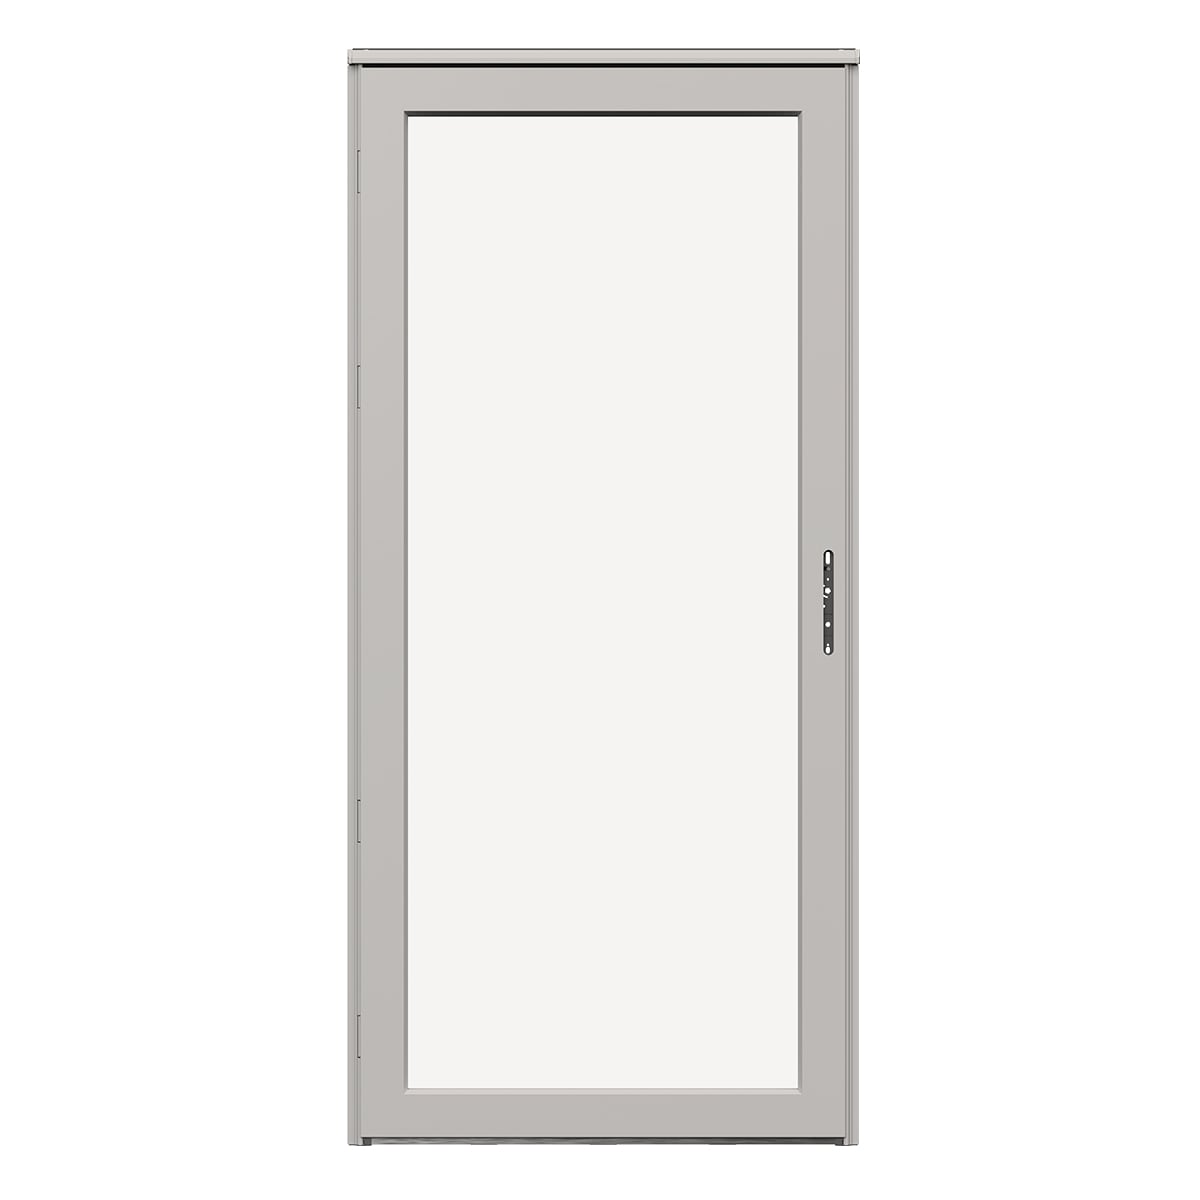 Platinum Secure Glass 32-in x 81-in Pebblestone Full-view Aluminum Storm Door Right-Hand Outswing in Brown | - LARSON 44904371L